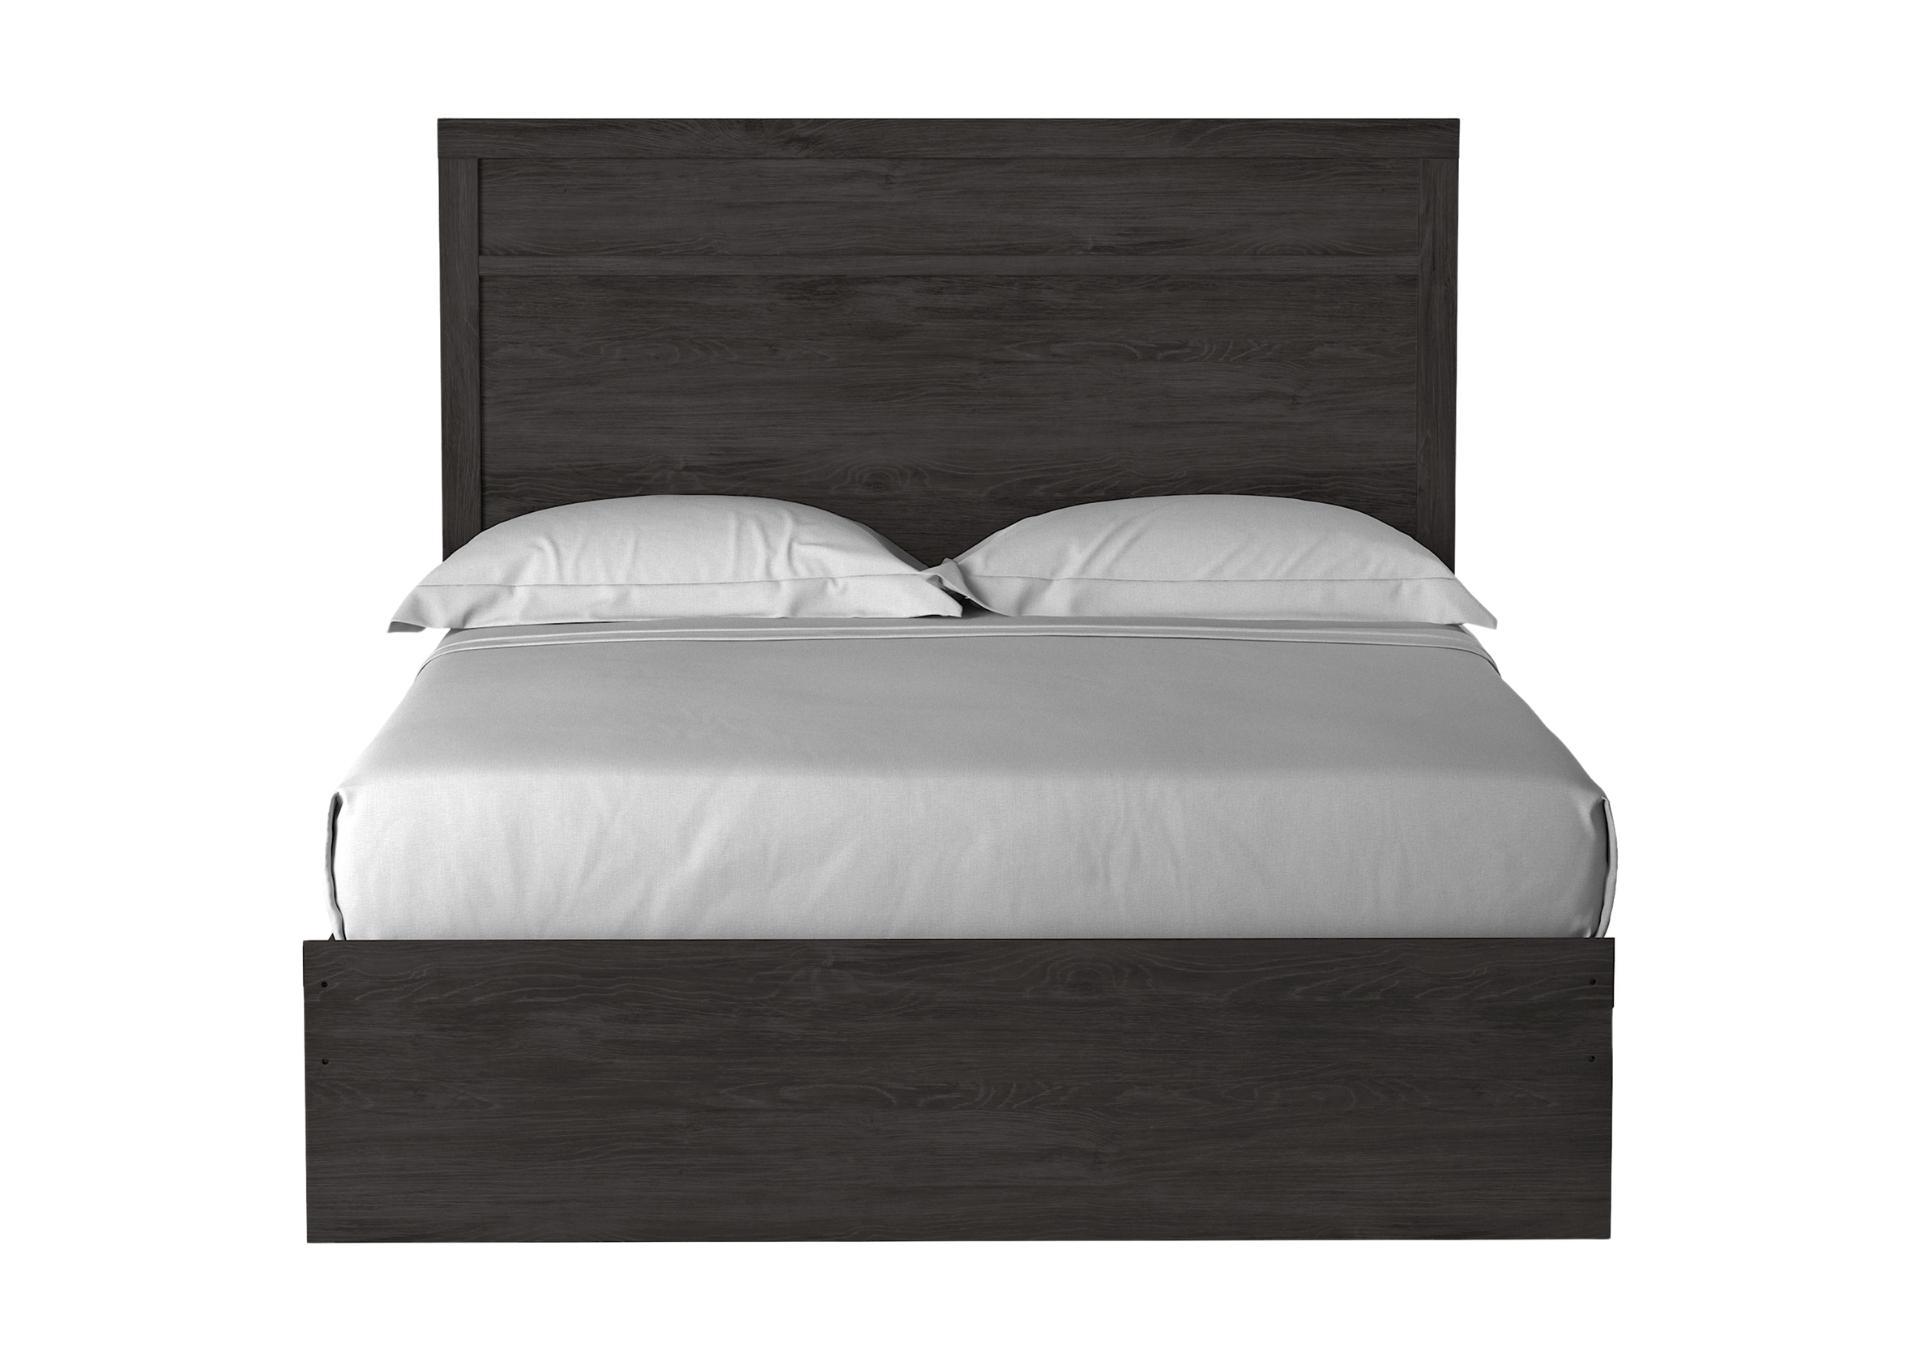 BELACHIME QUEEN PANEL BED,ASHLEY FURNITURE INC.